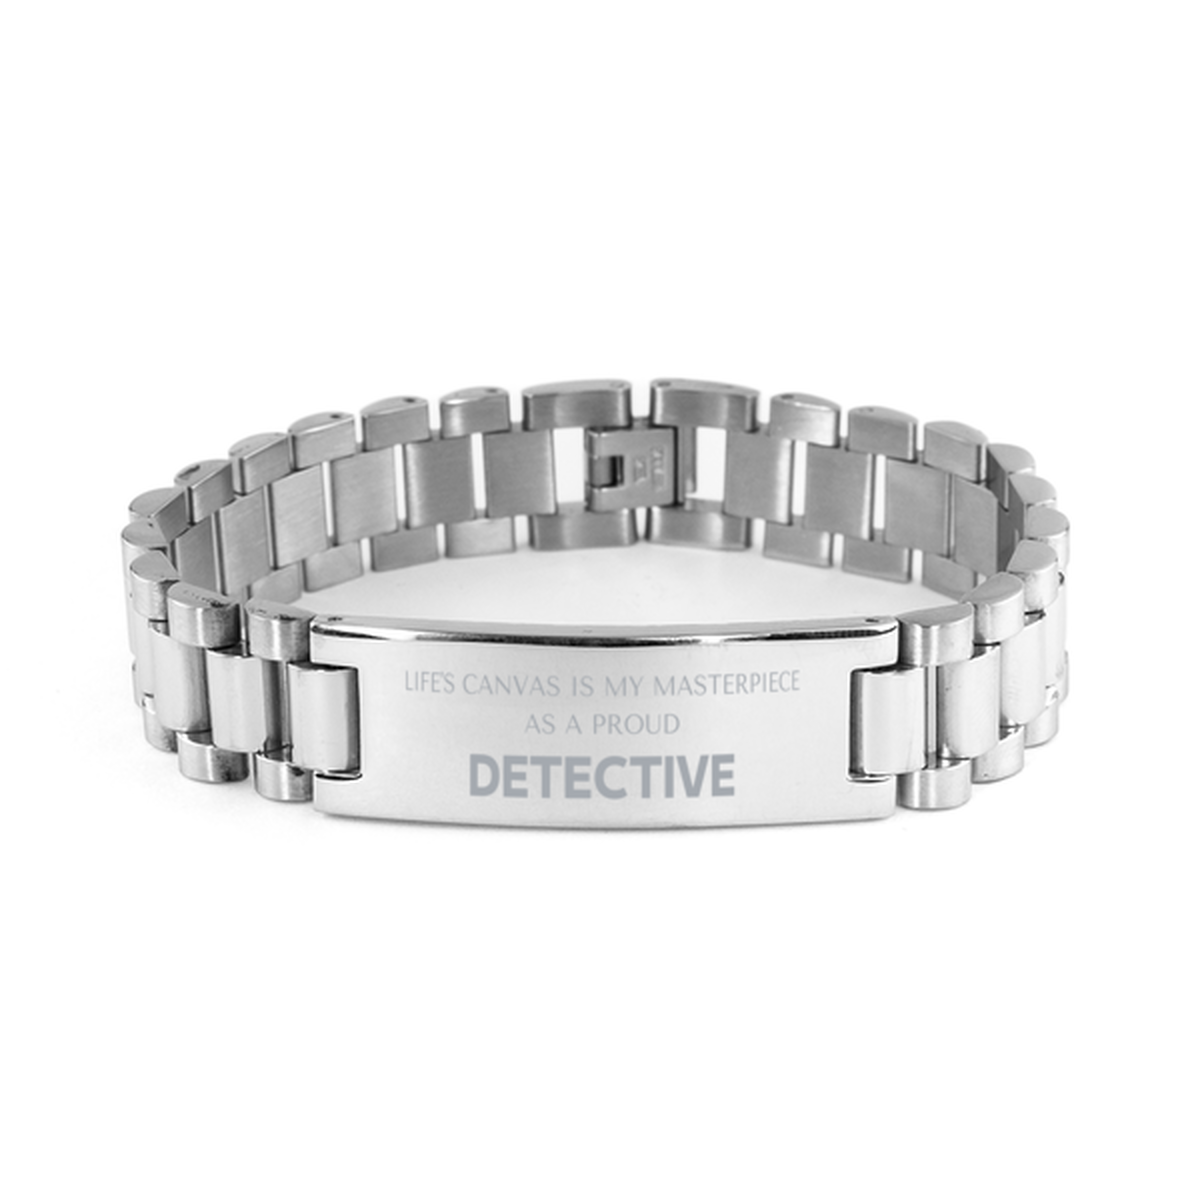 Proud Detective Gifts, Life's canvas is my masterpiece, Epic Birthday Christmas Unique Ladder Stainless Steel Bracelet For Detective, Coworkers, Men, Women, Friends